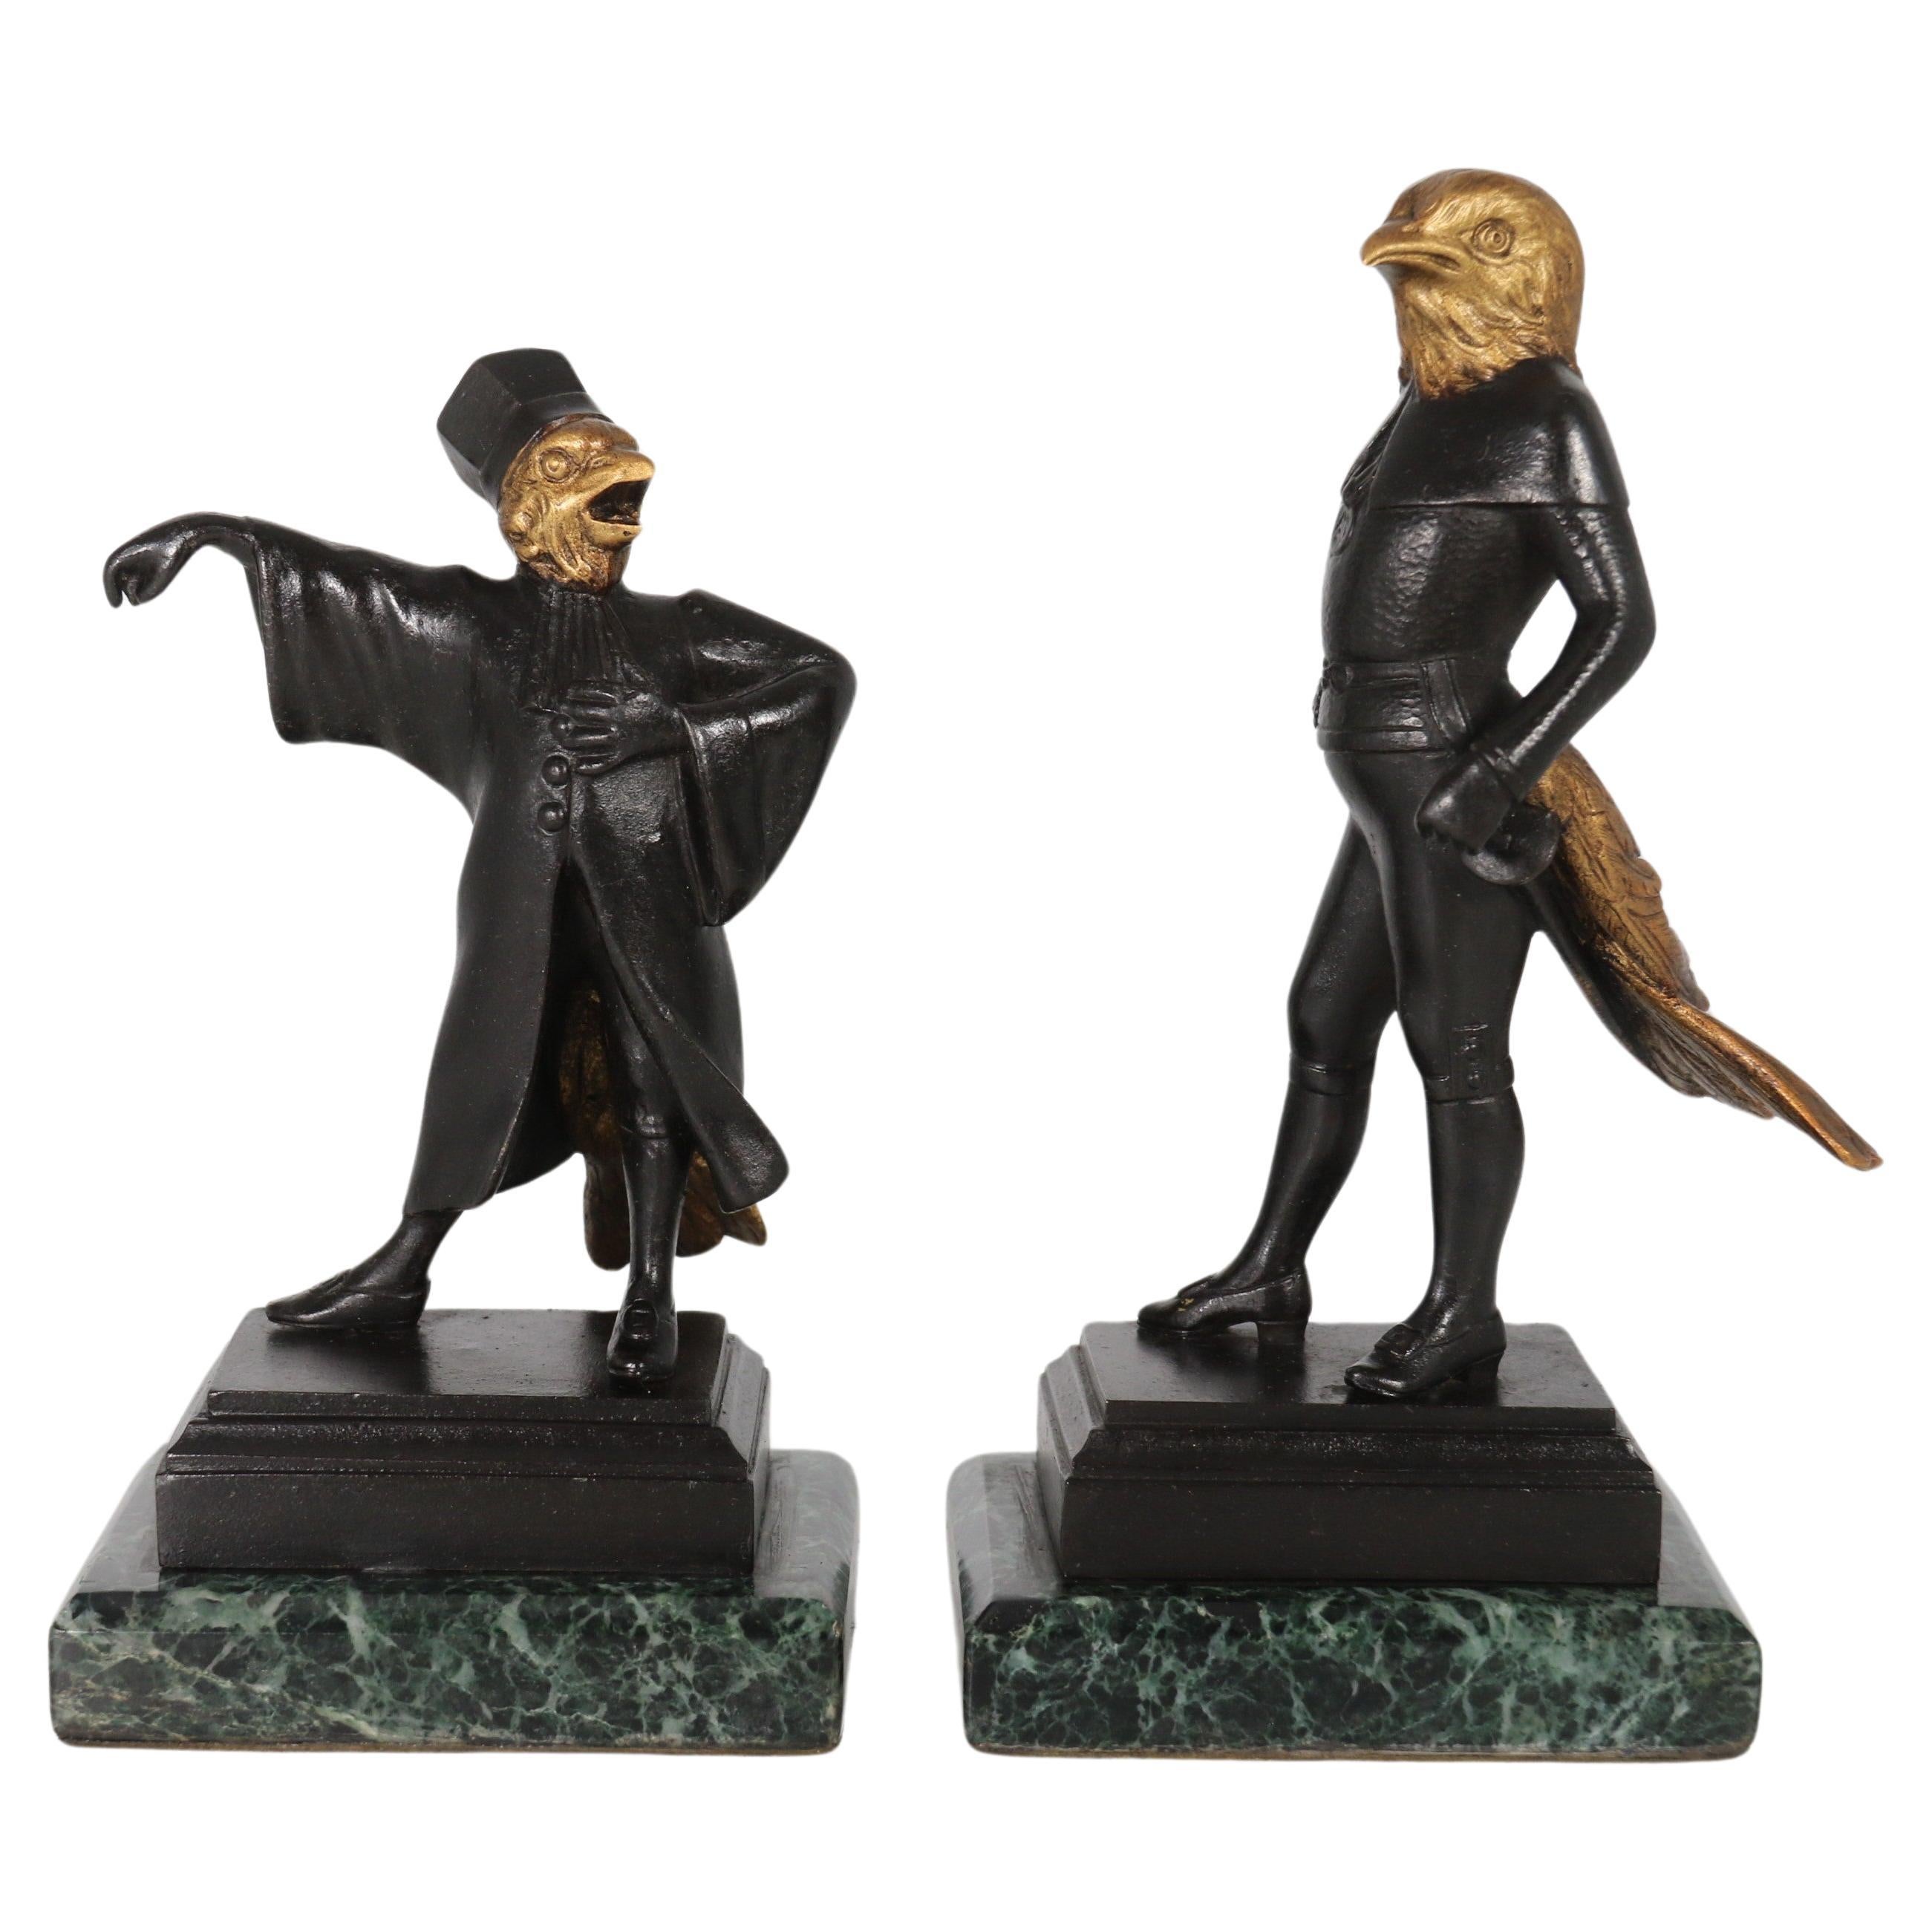 A  pair of French bronze caricature figures of theatrical birds, circa 1880